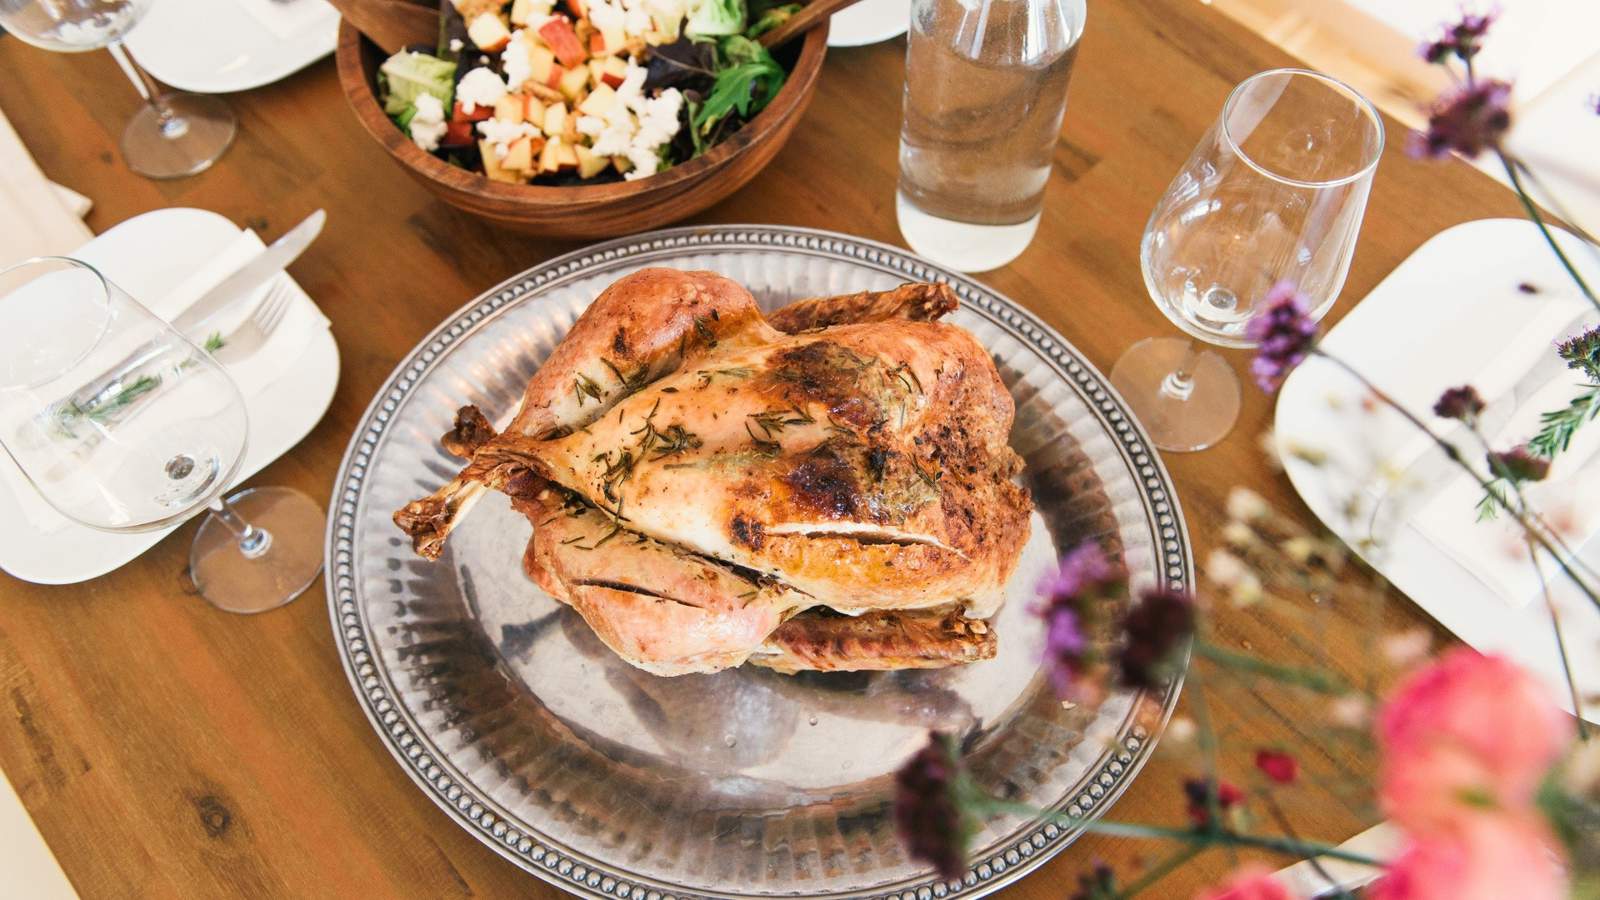 Hosting your first Thanksgiving? Here’s some advice from the experts